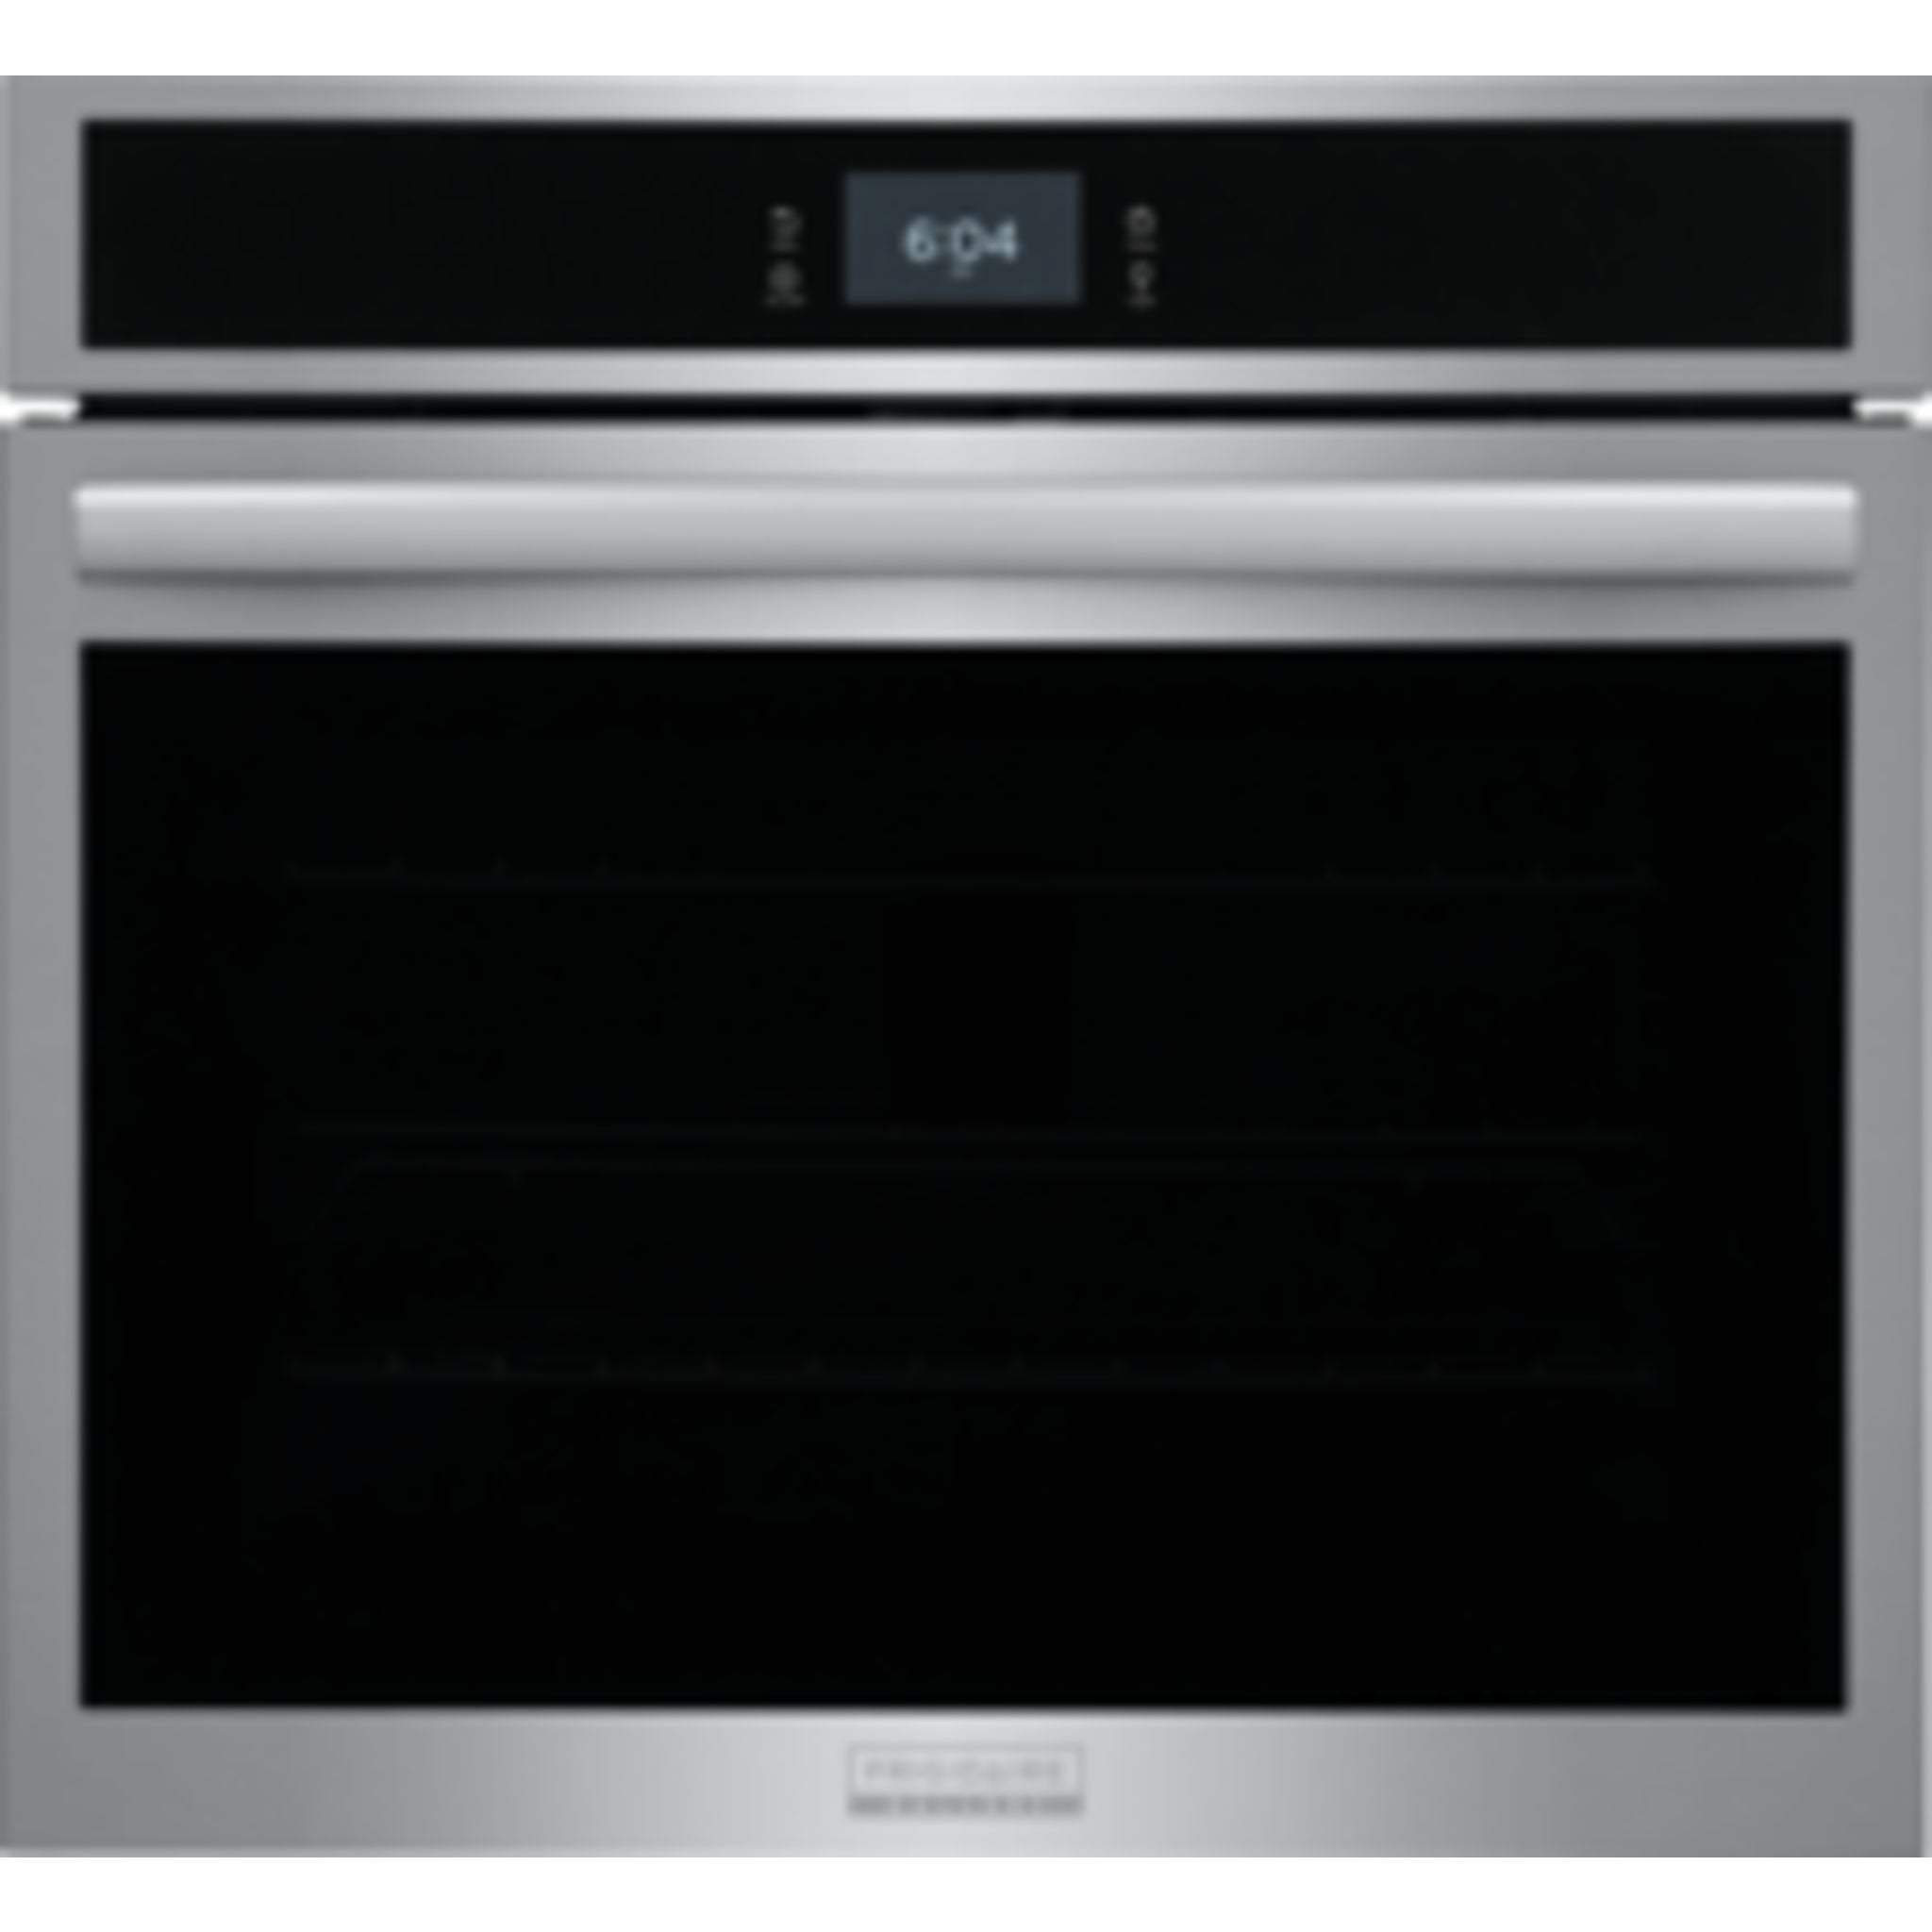 Frigidaire Gallery, Frigidaire Gallery 30" True Convection Wall Oven (GCWS3067AF) - Stainless Steel